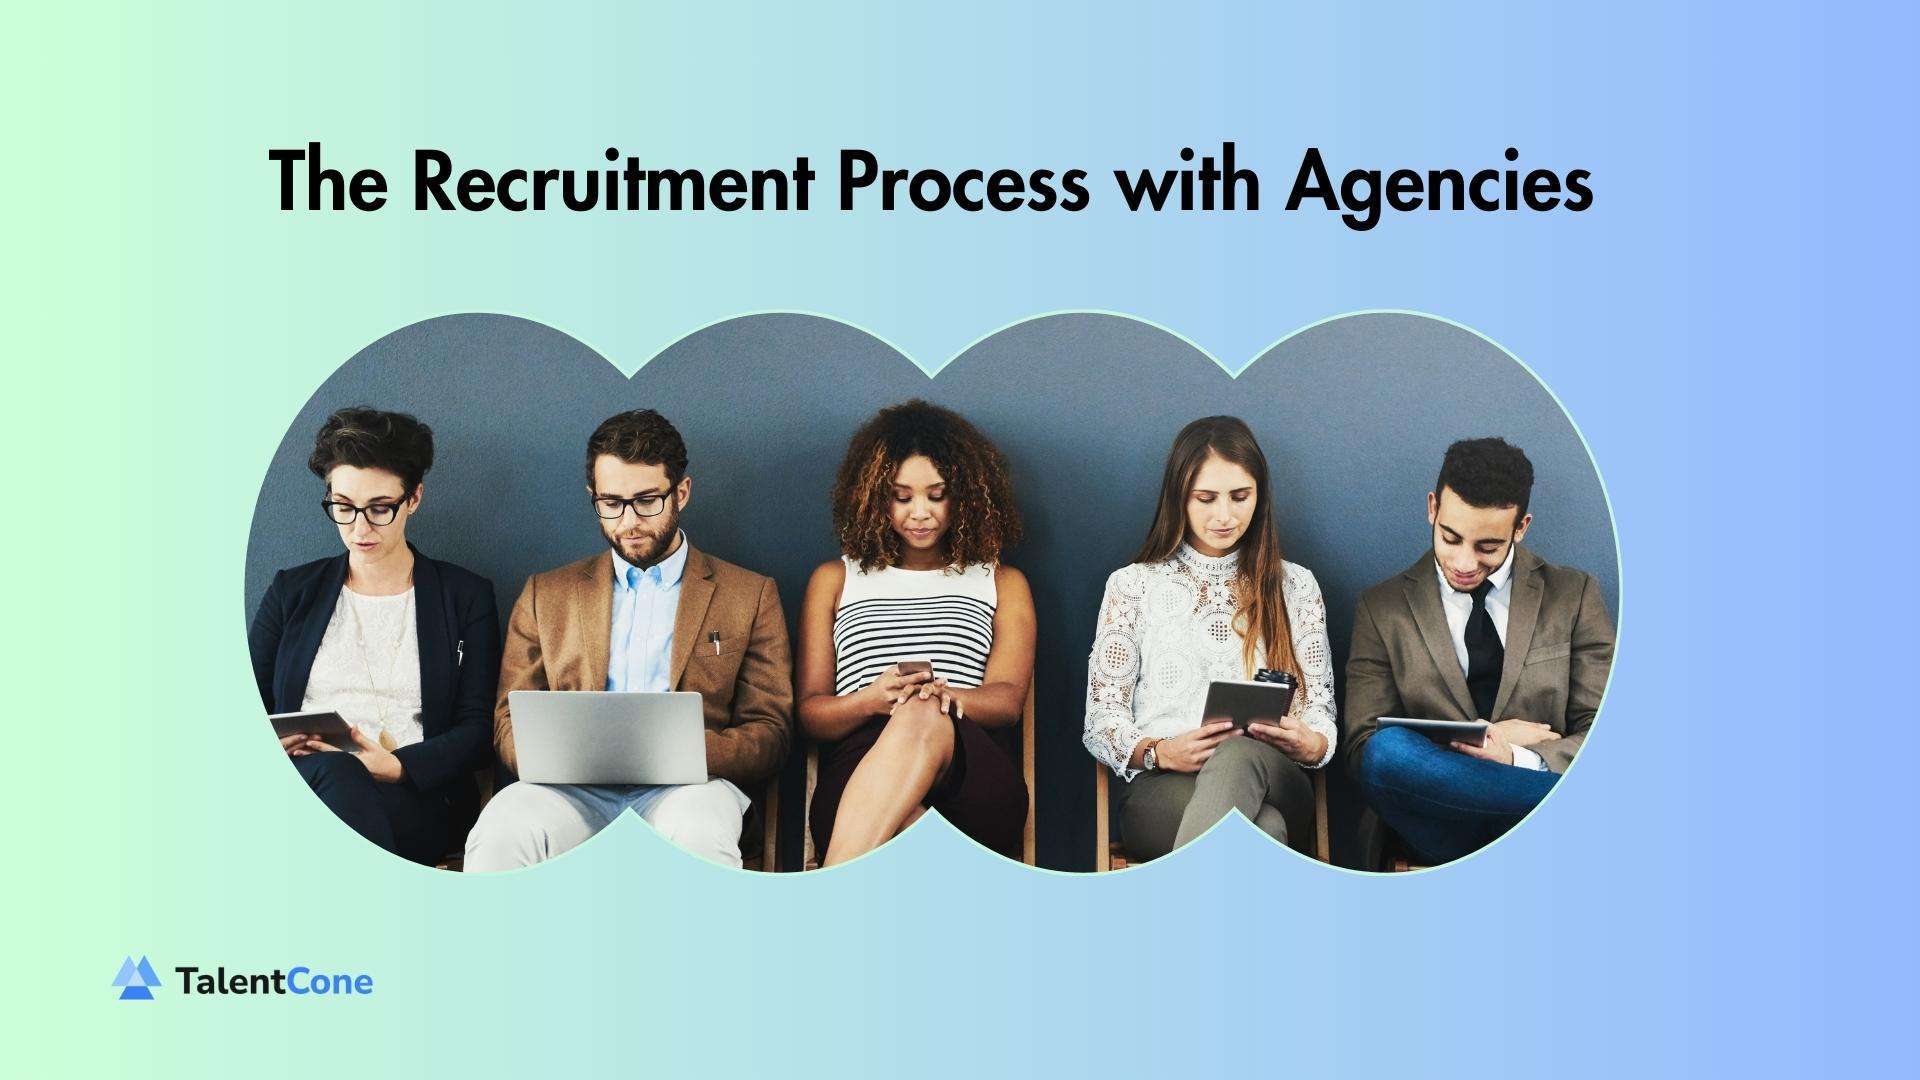 The Recruitment Process with Agencies